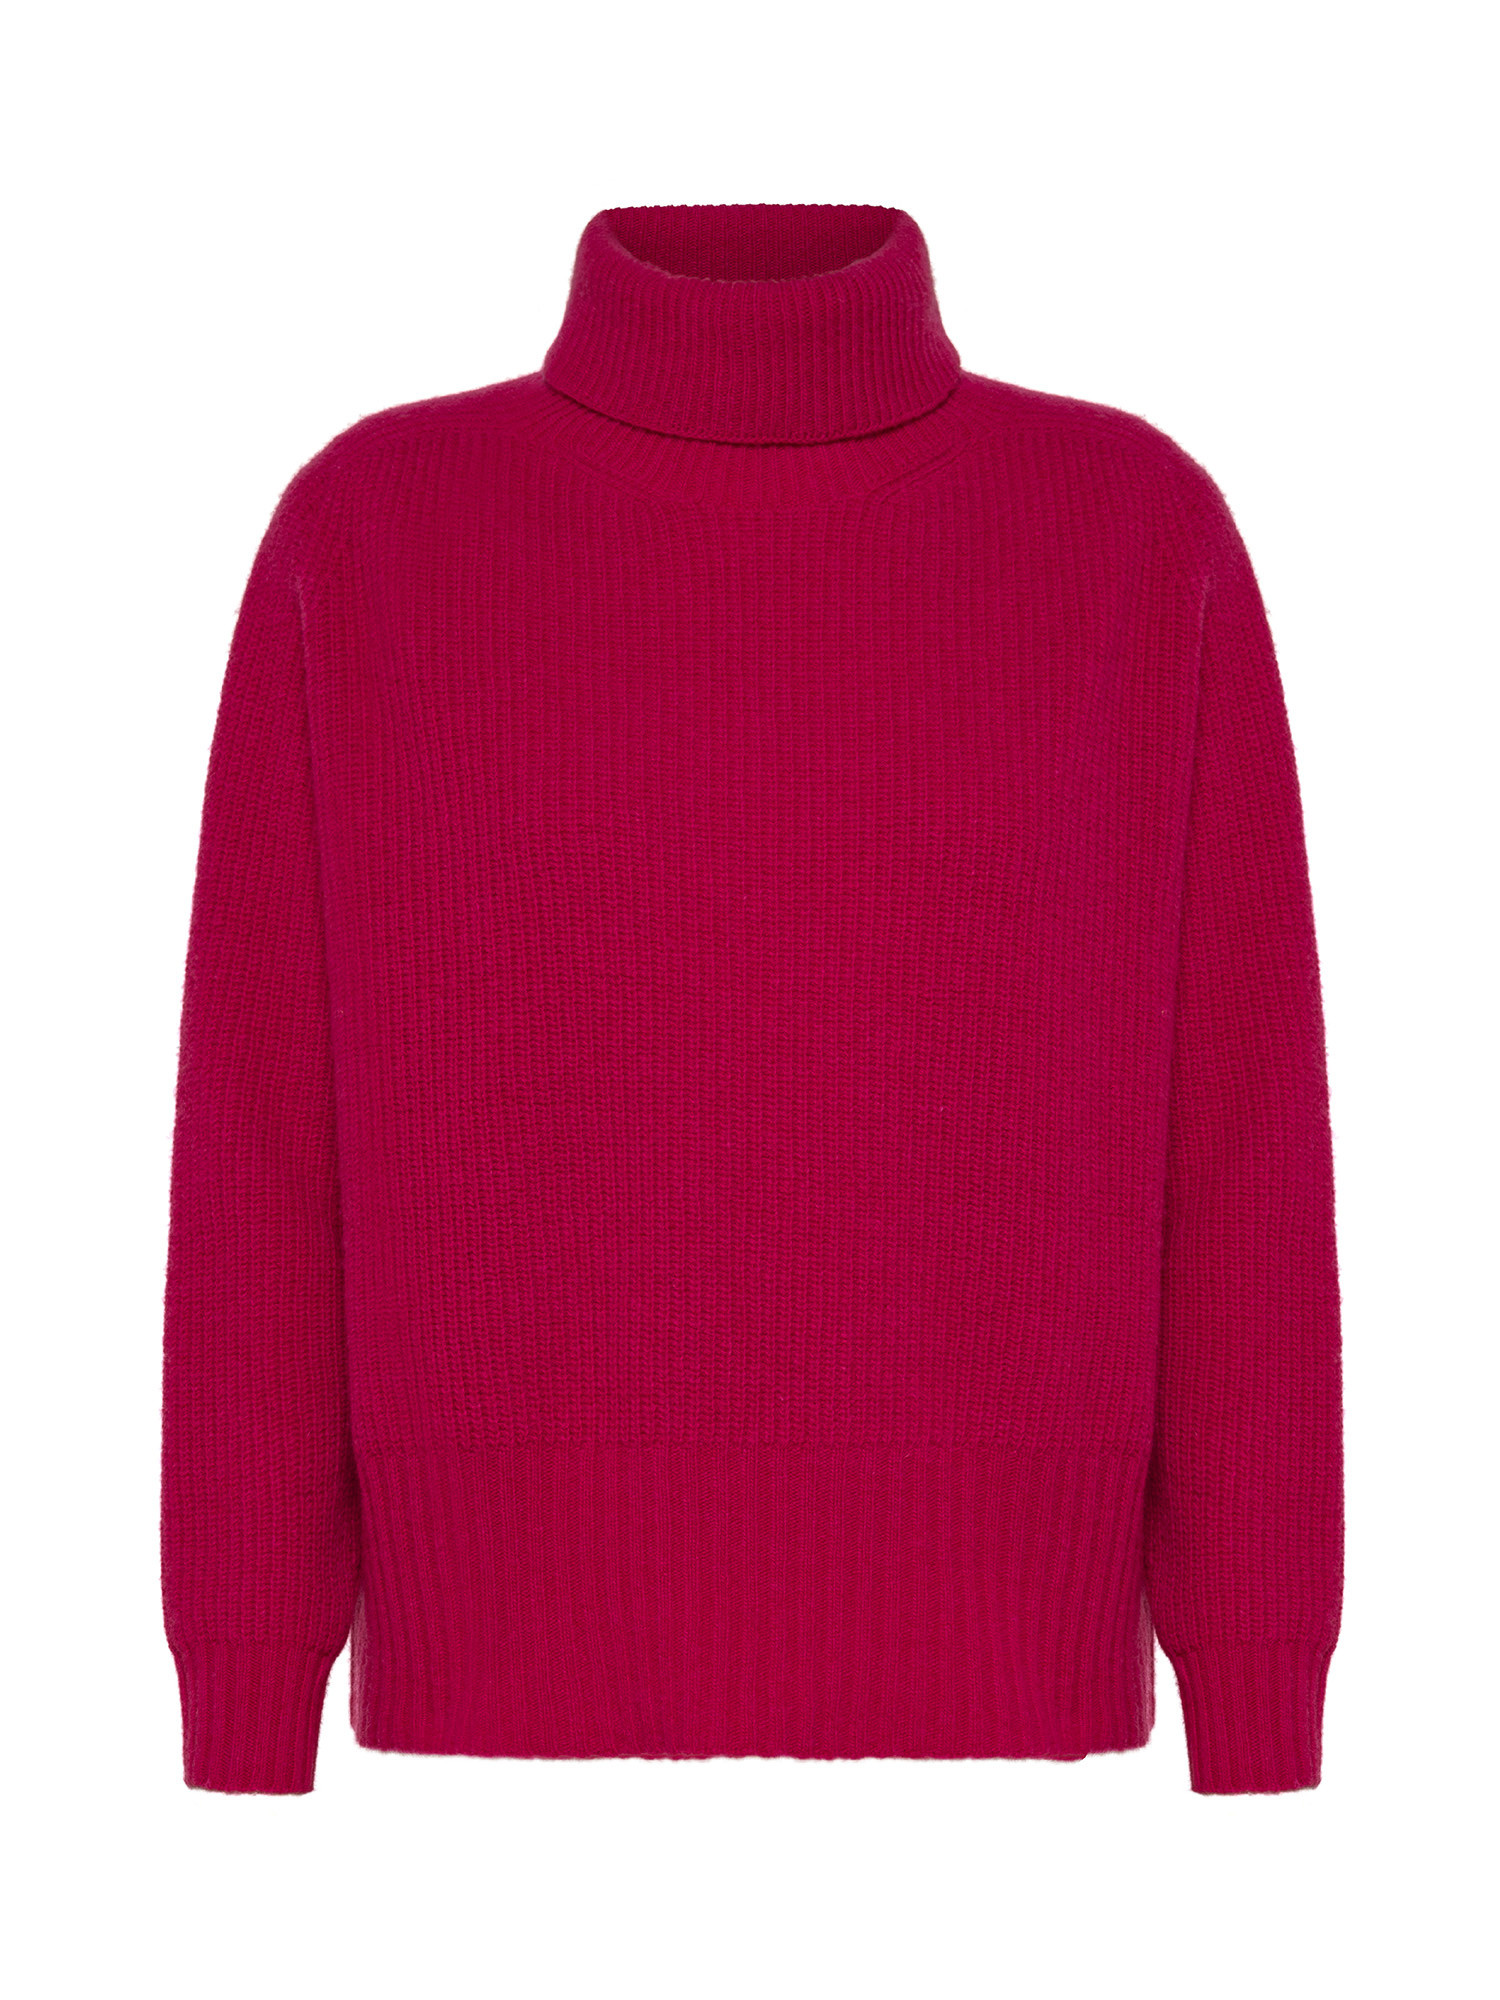 K Collection - Carded wool turtleneck pullover, Pink Fuchsia, large image number 0